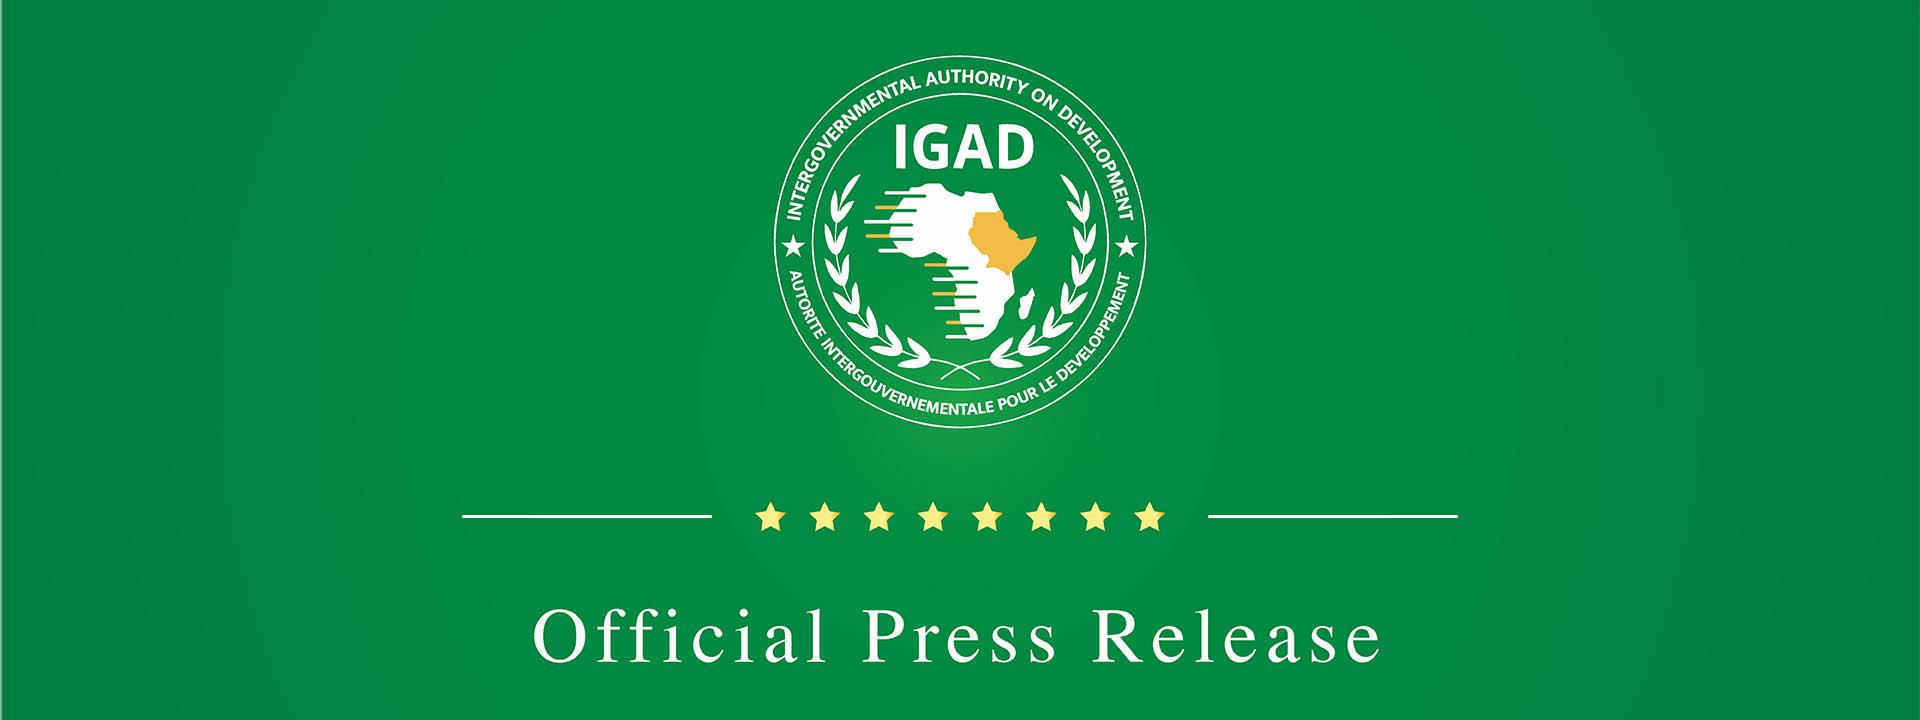 IGAD Executive Secretary Announces the Appointment of Hon. Lawrence Korbandy as Special Envoy for Sudan.